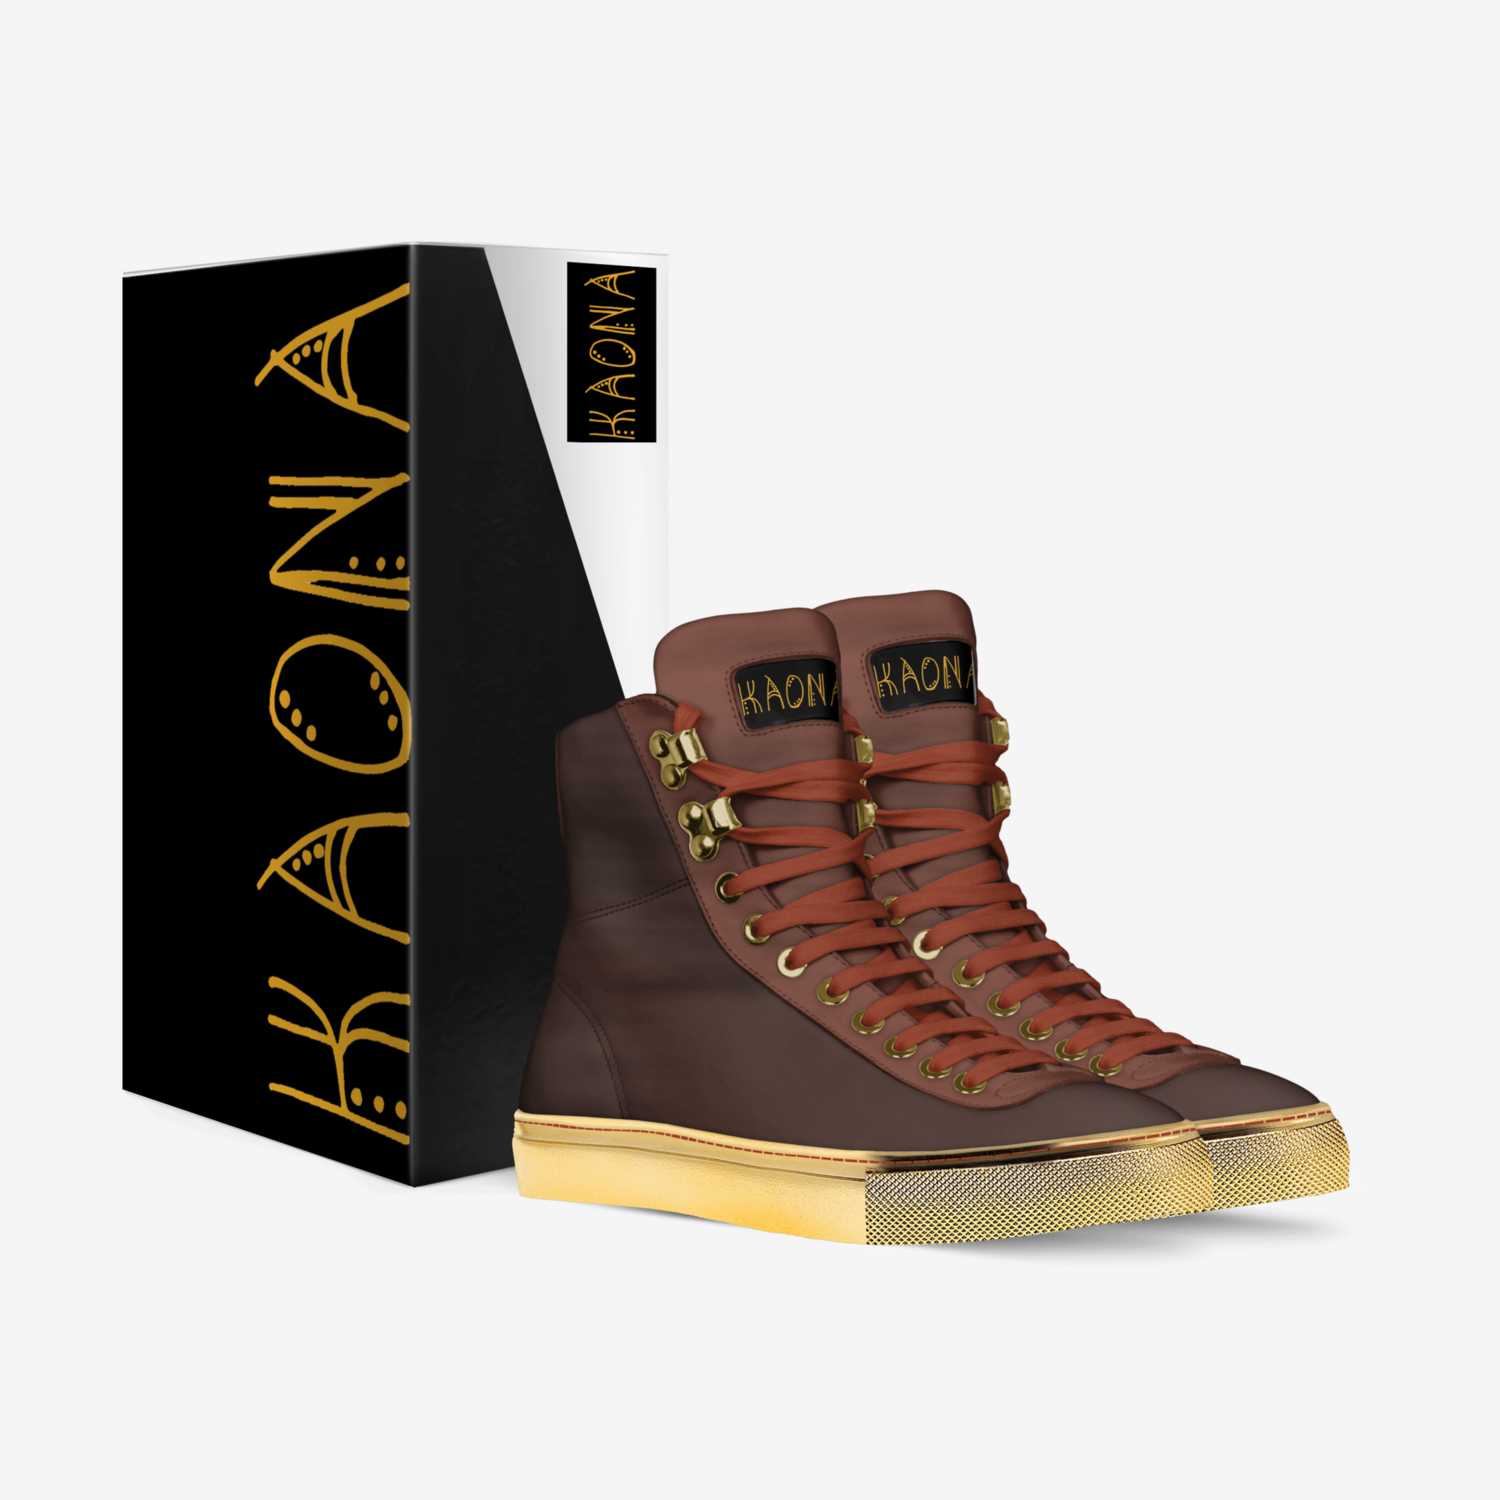 Adohi custom made in Italy shoes by Dominique Karaya | Box view